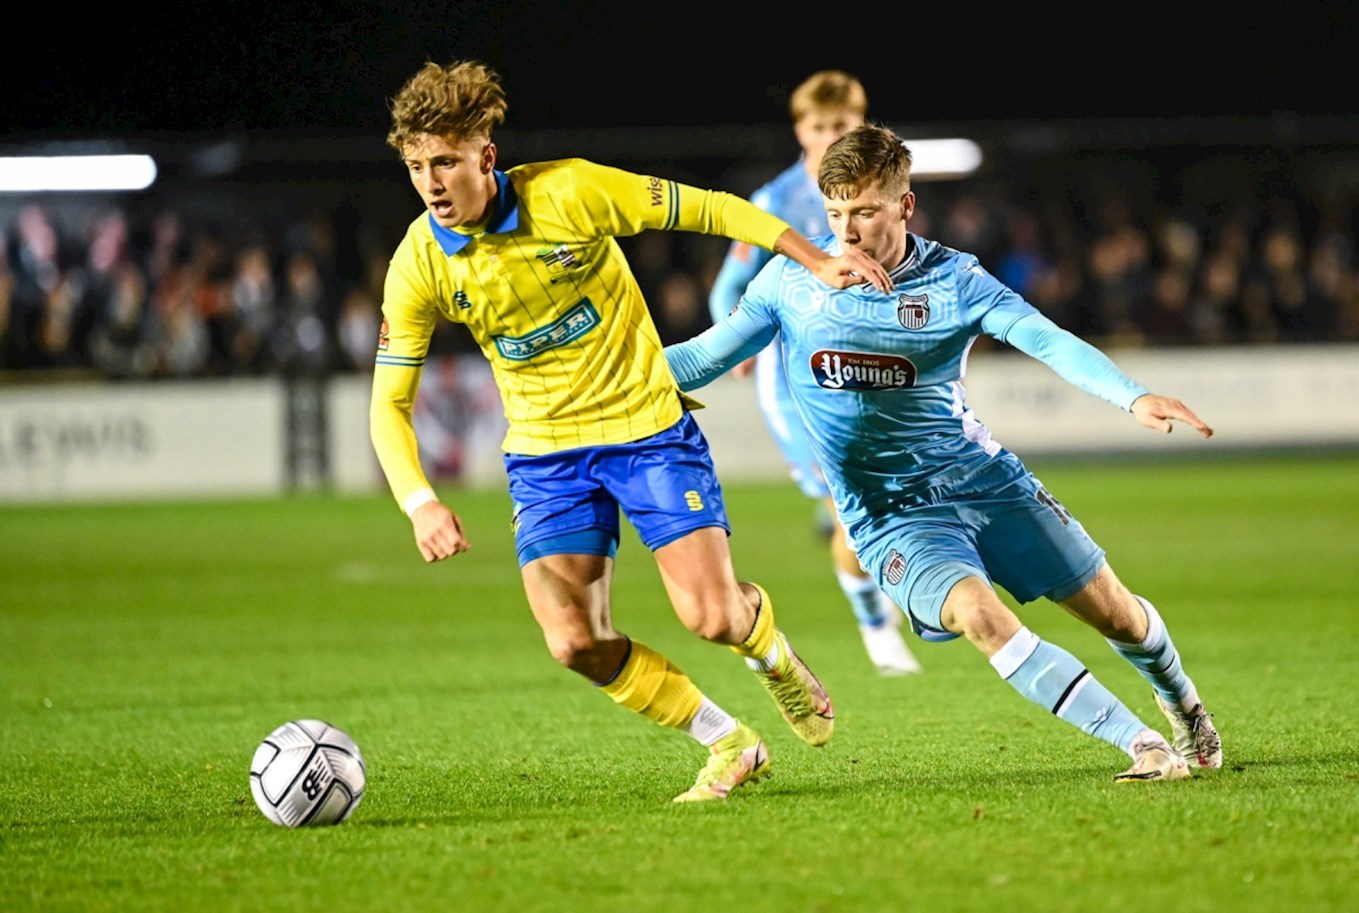 Harry Clifton in action against Solihull Moors